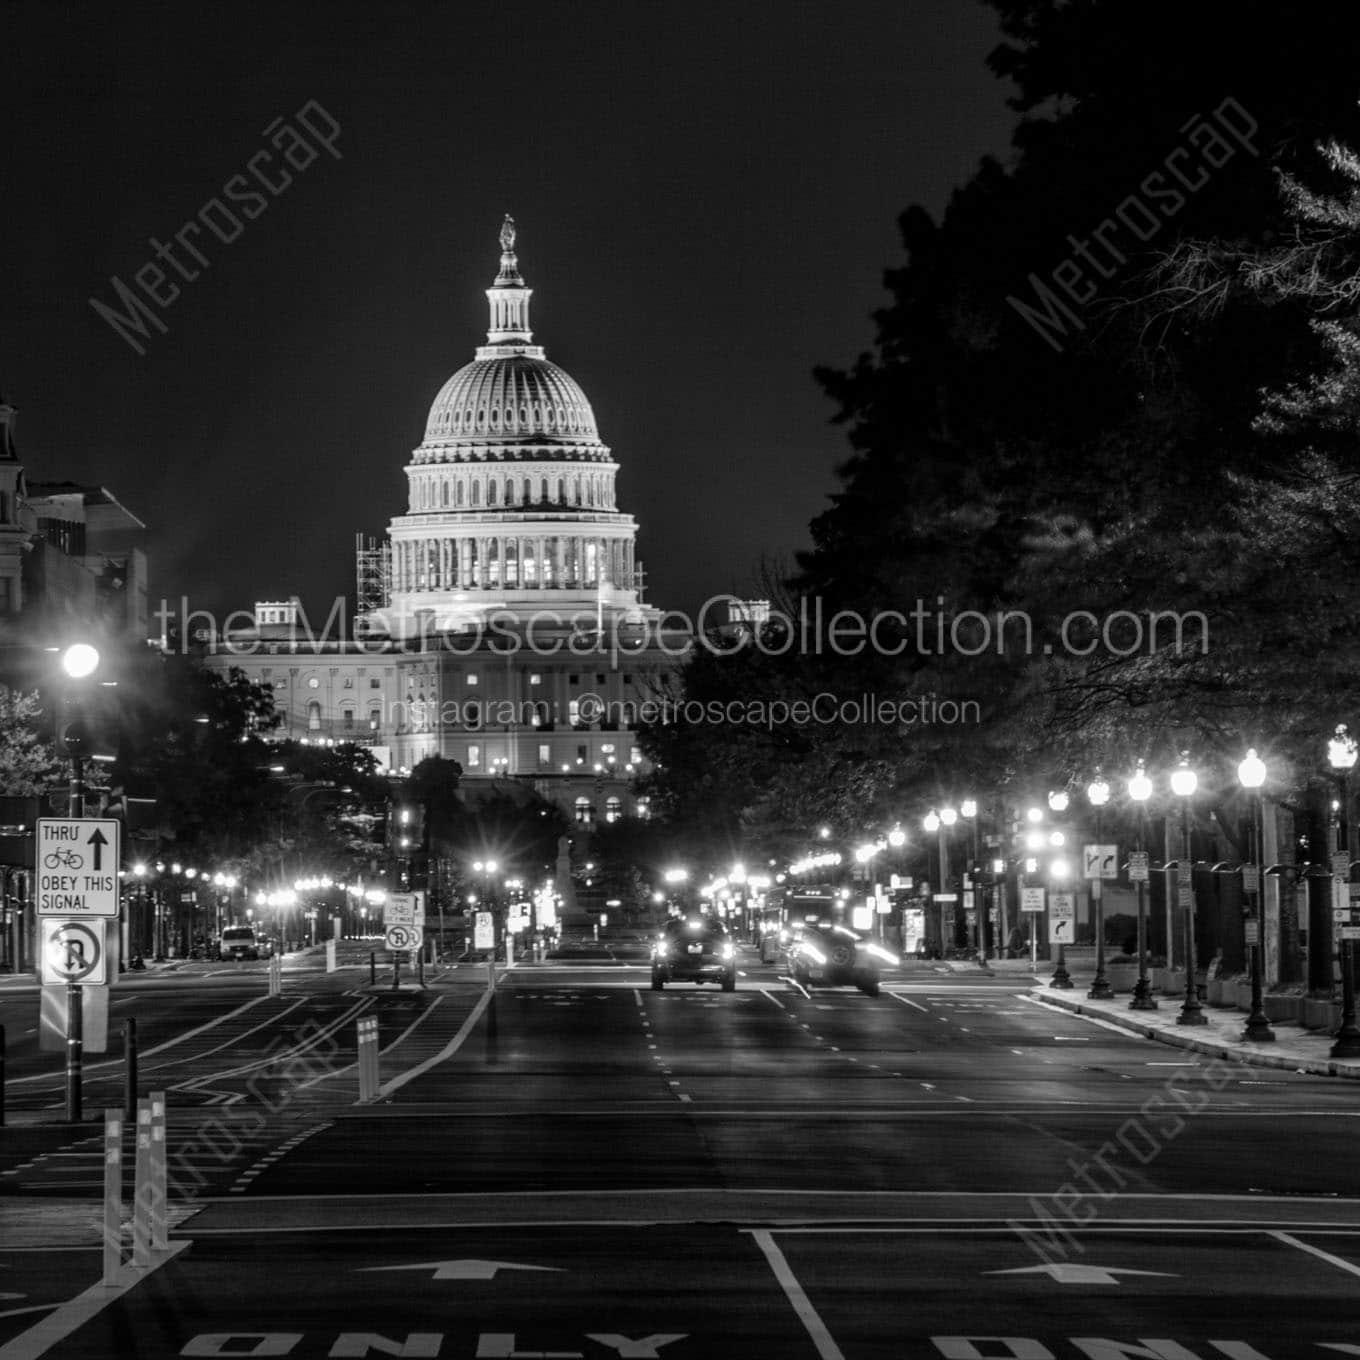 united states capitol building at night Black & White Office Art